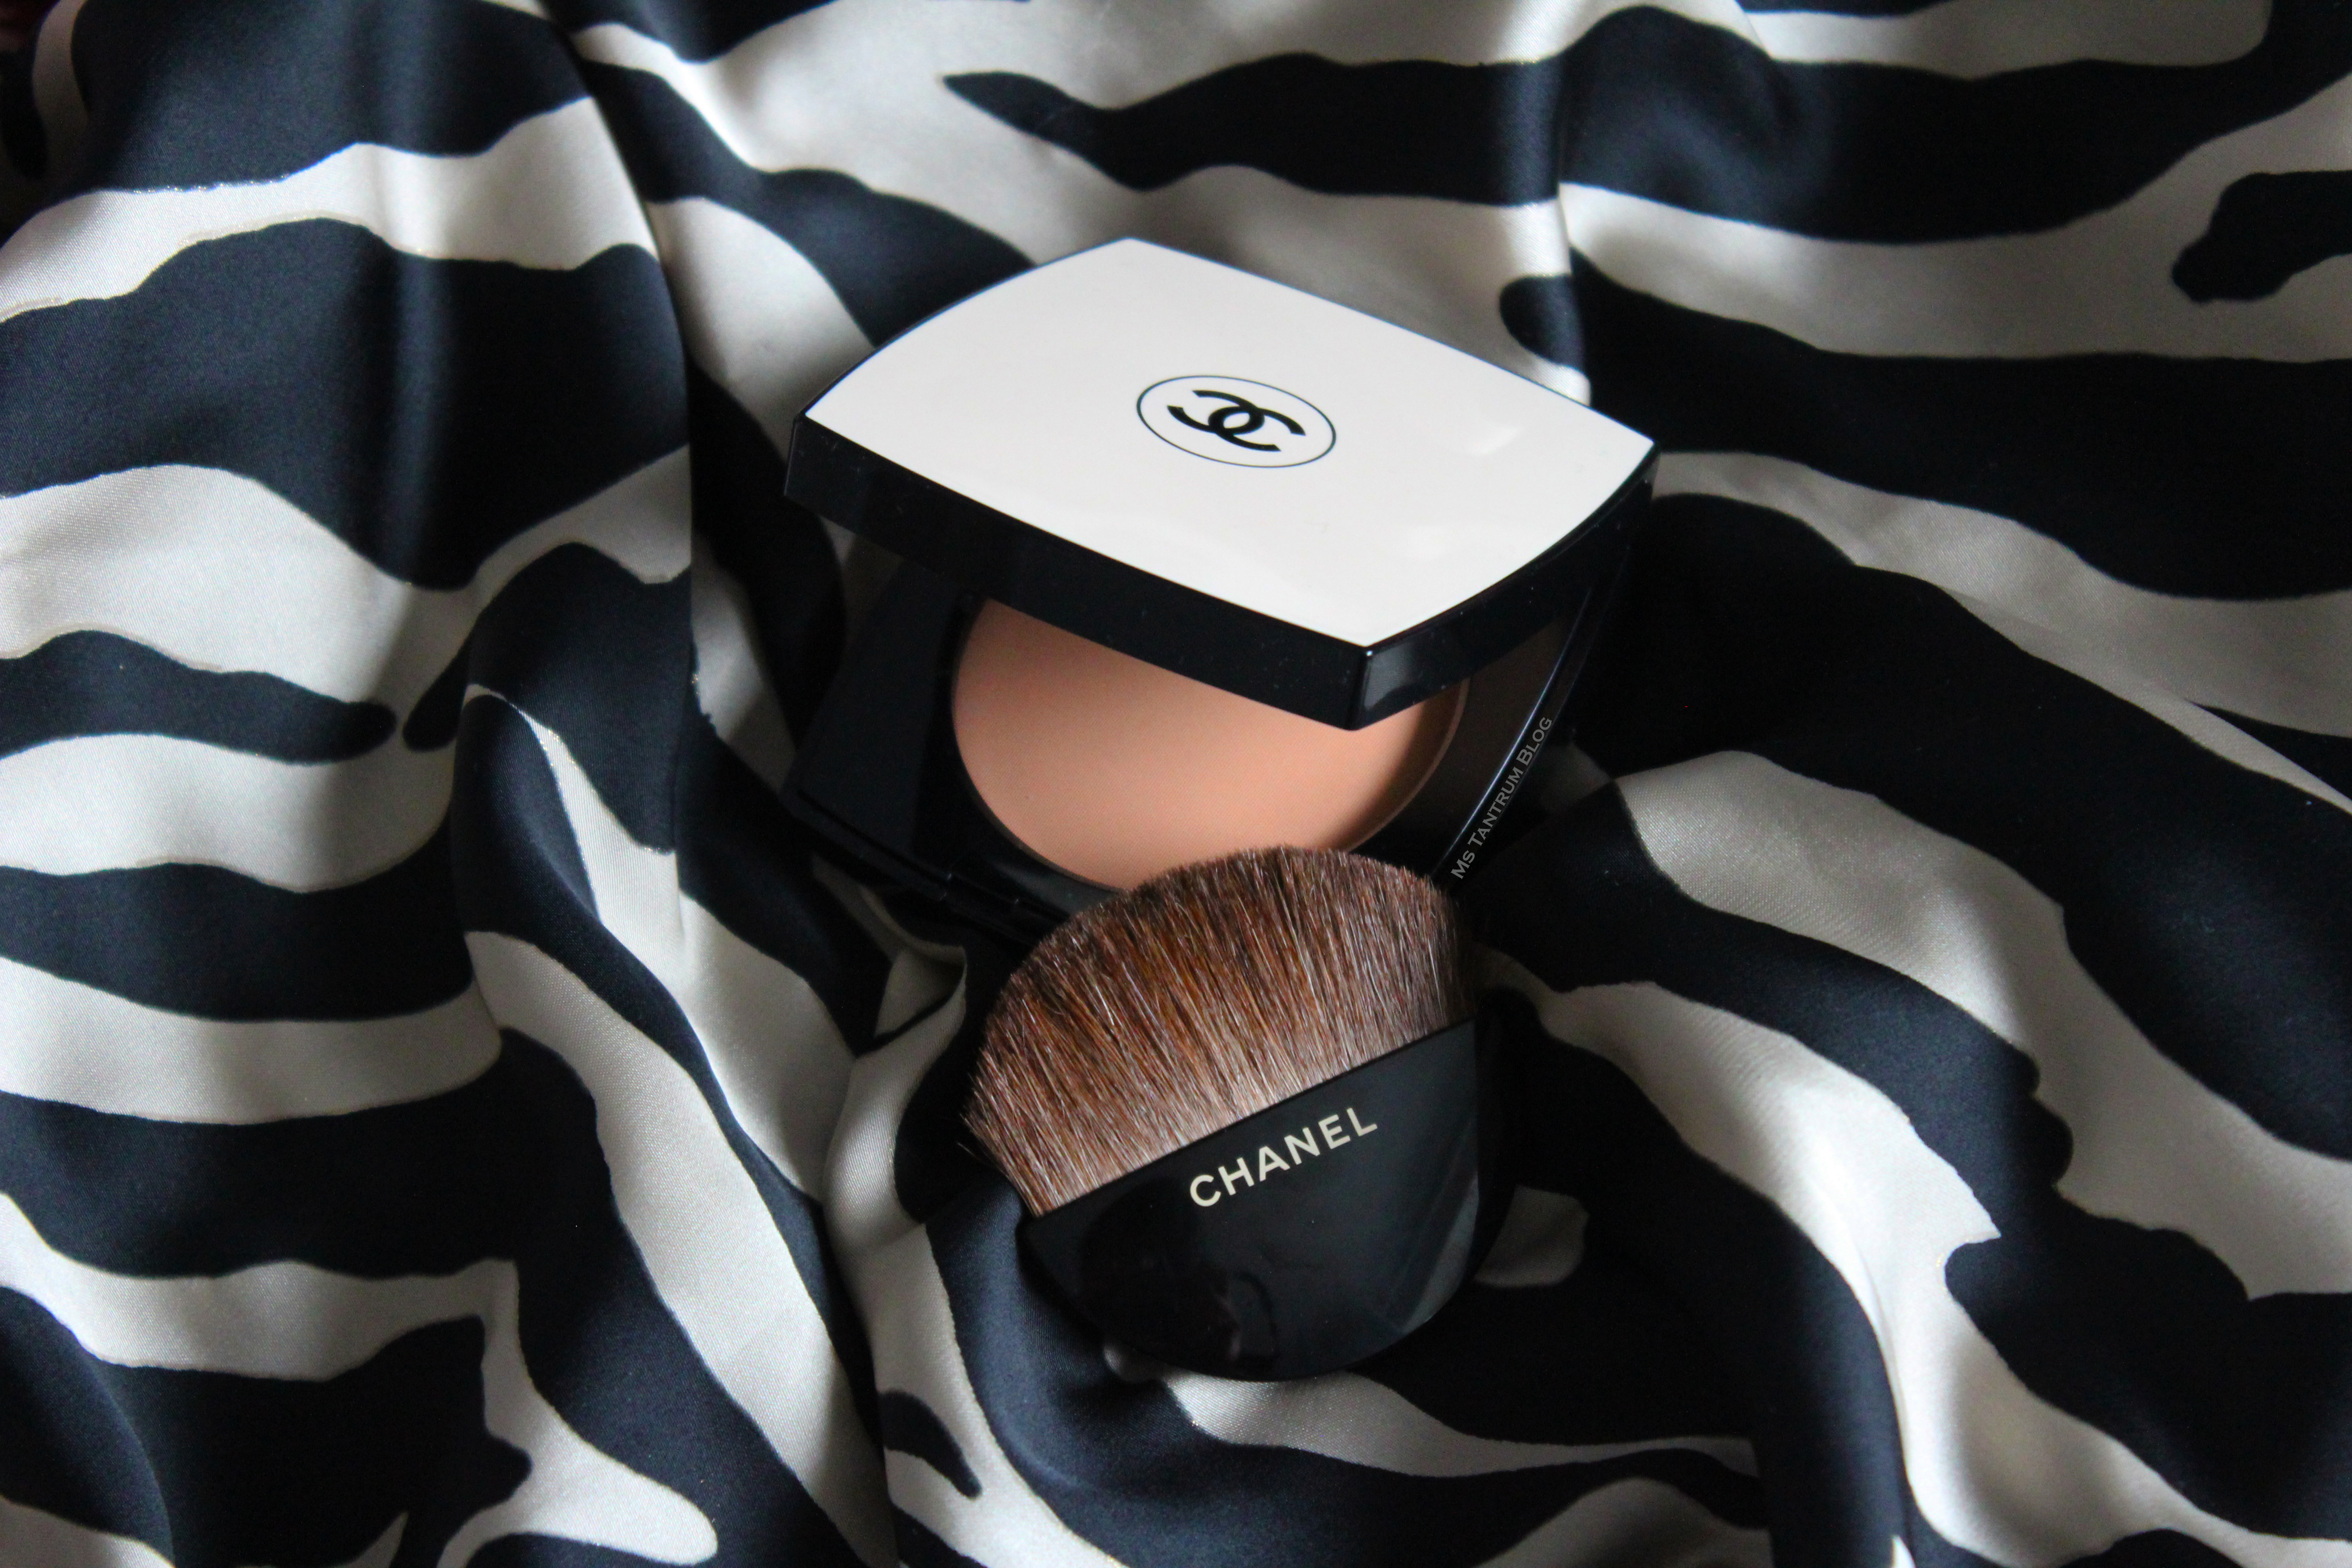 Chanel Les Beiges Healthy Glow Sheer Powder Review